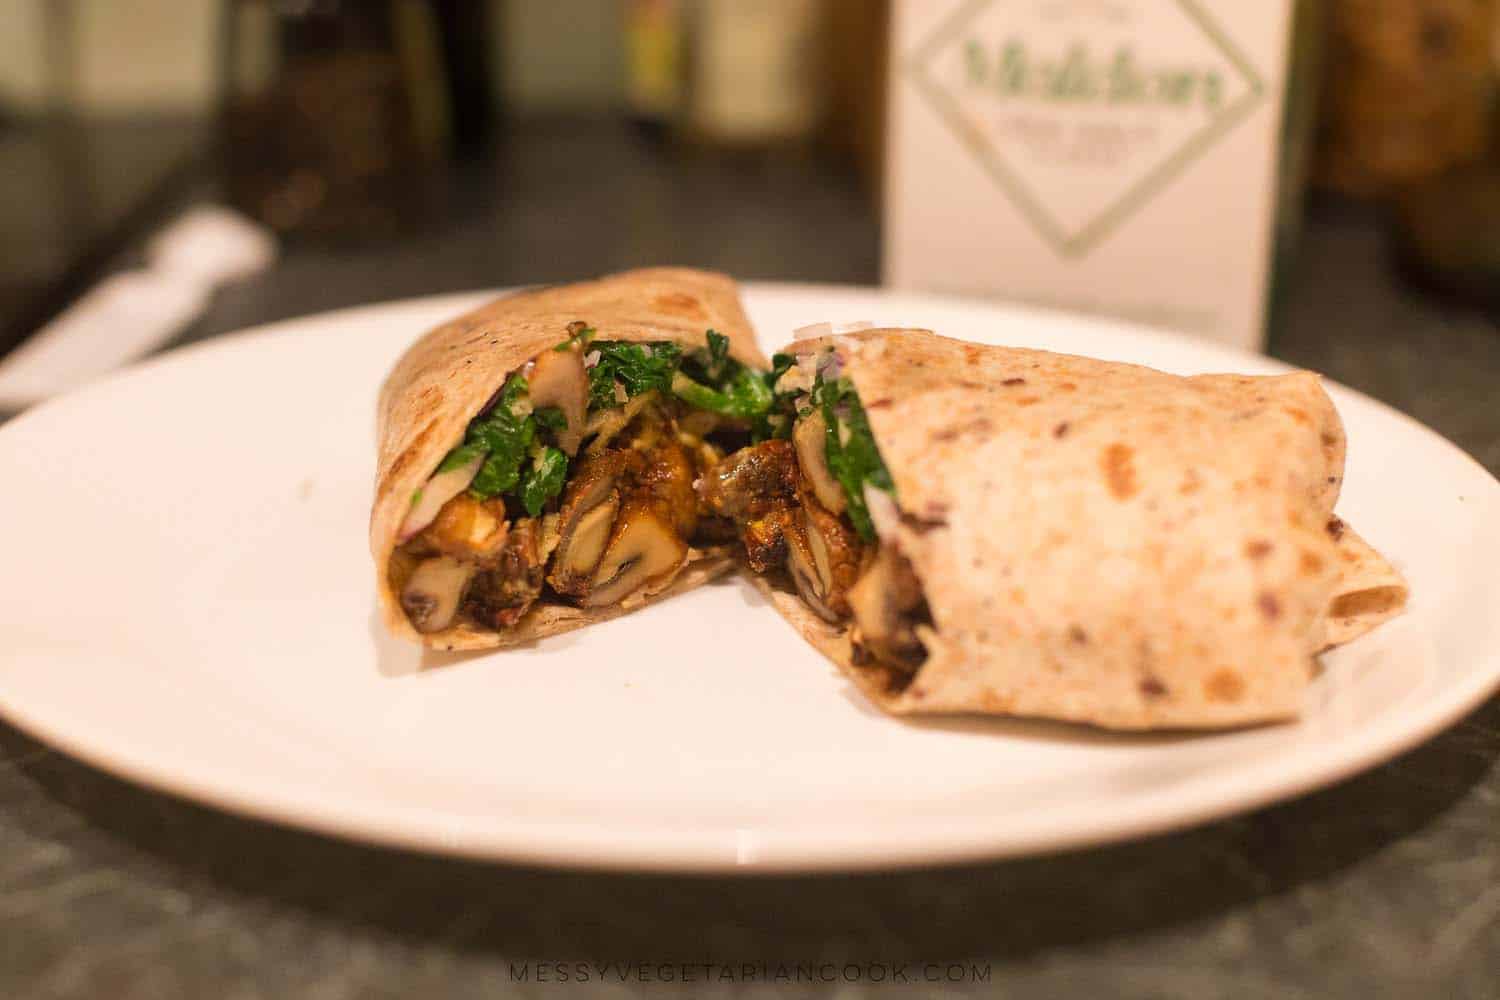 Spinach and Roasted Mushrooms Wrap